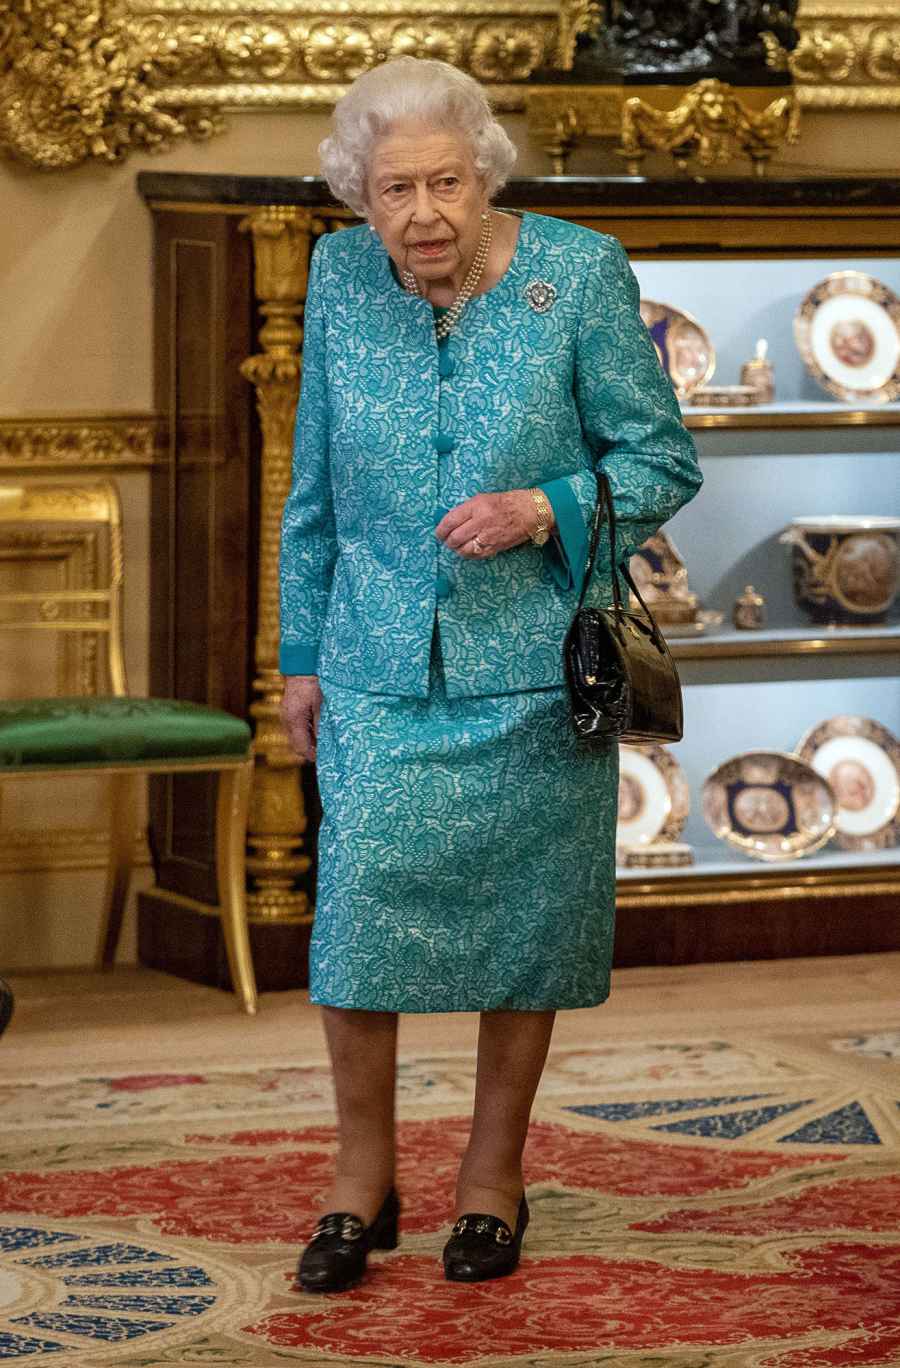 Queen Elizabeth II Cancels Another Appearance After Hospital Stay